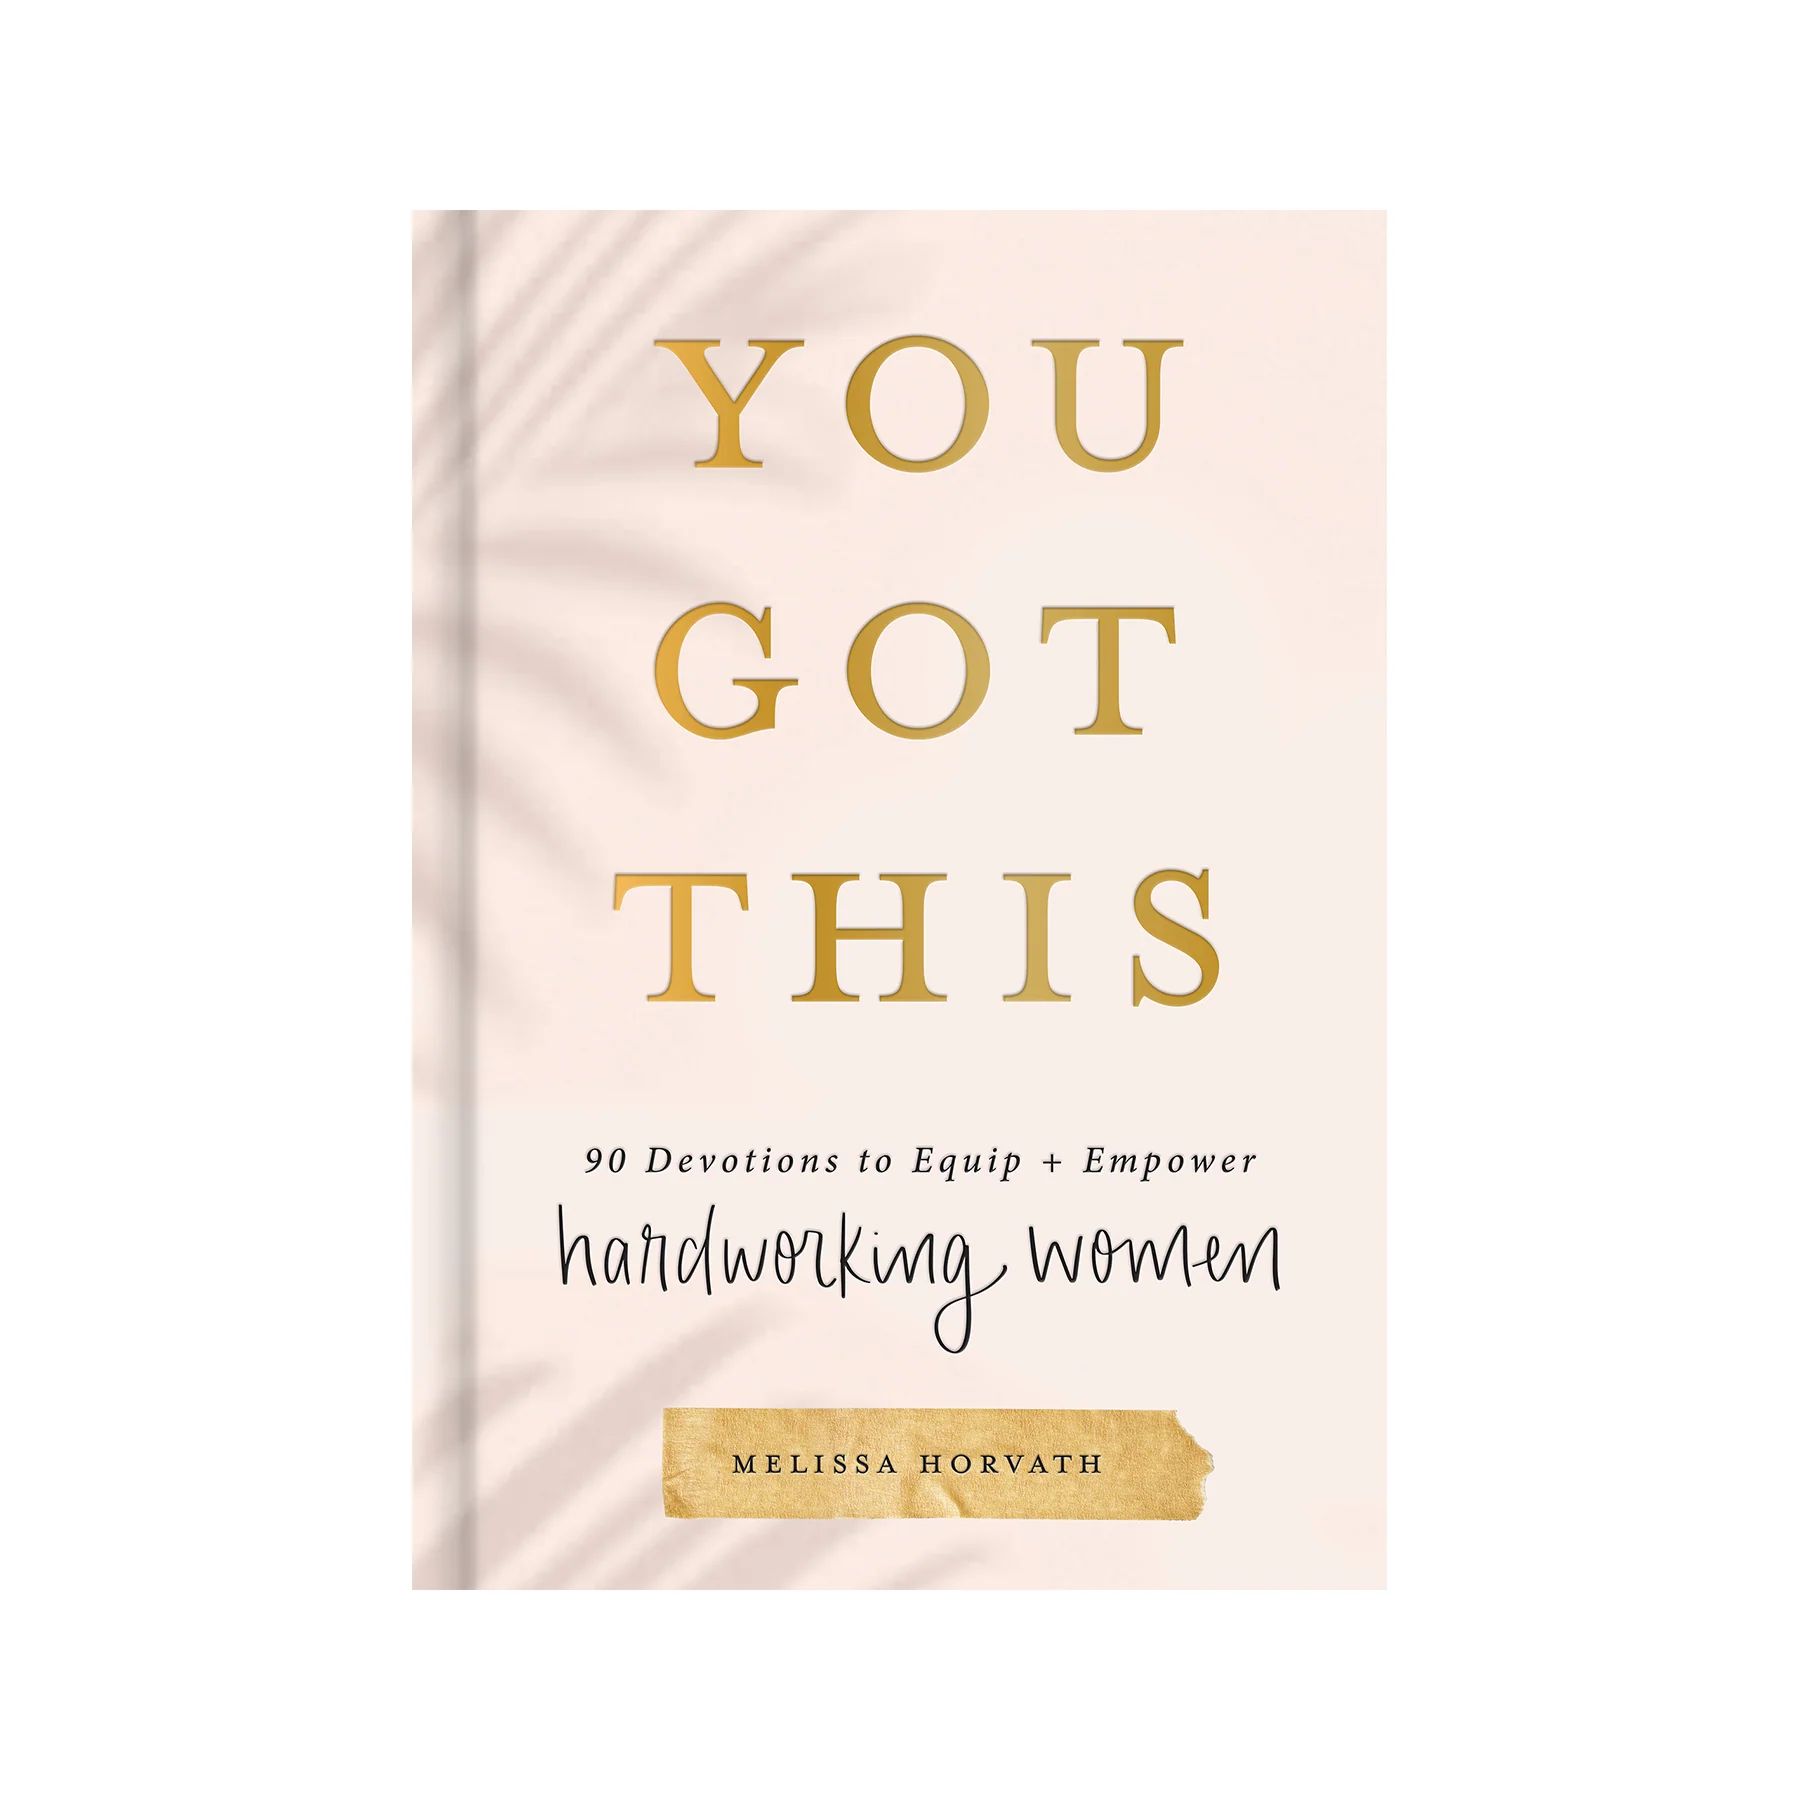 You Got This: 90 Devotions to Equip and Empower Hardworking Women | Sweet Water Decor, LLC